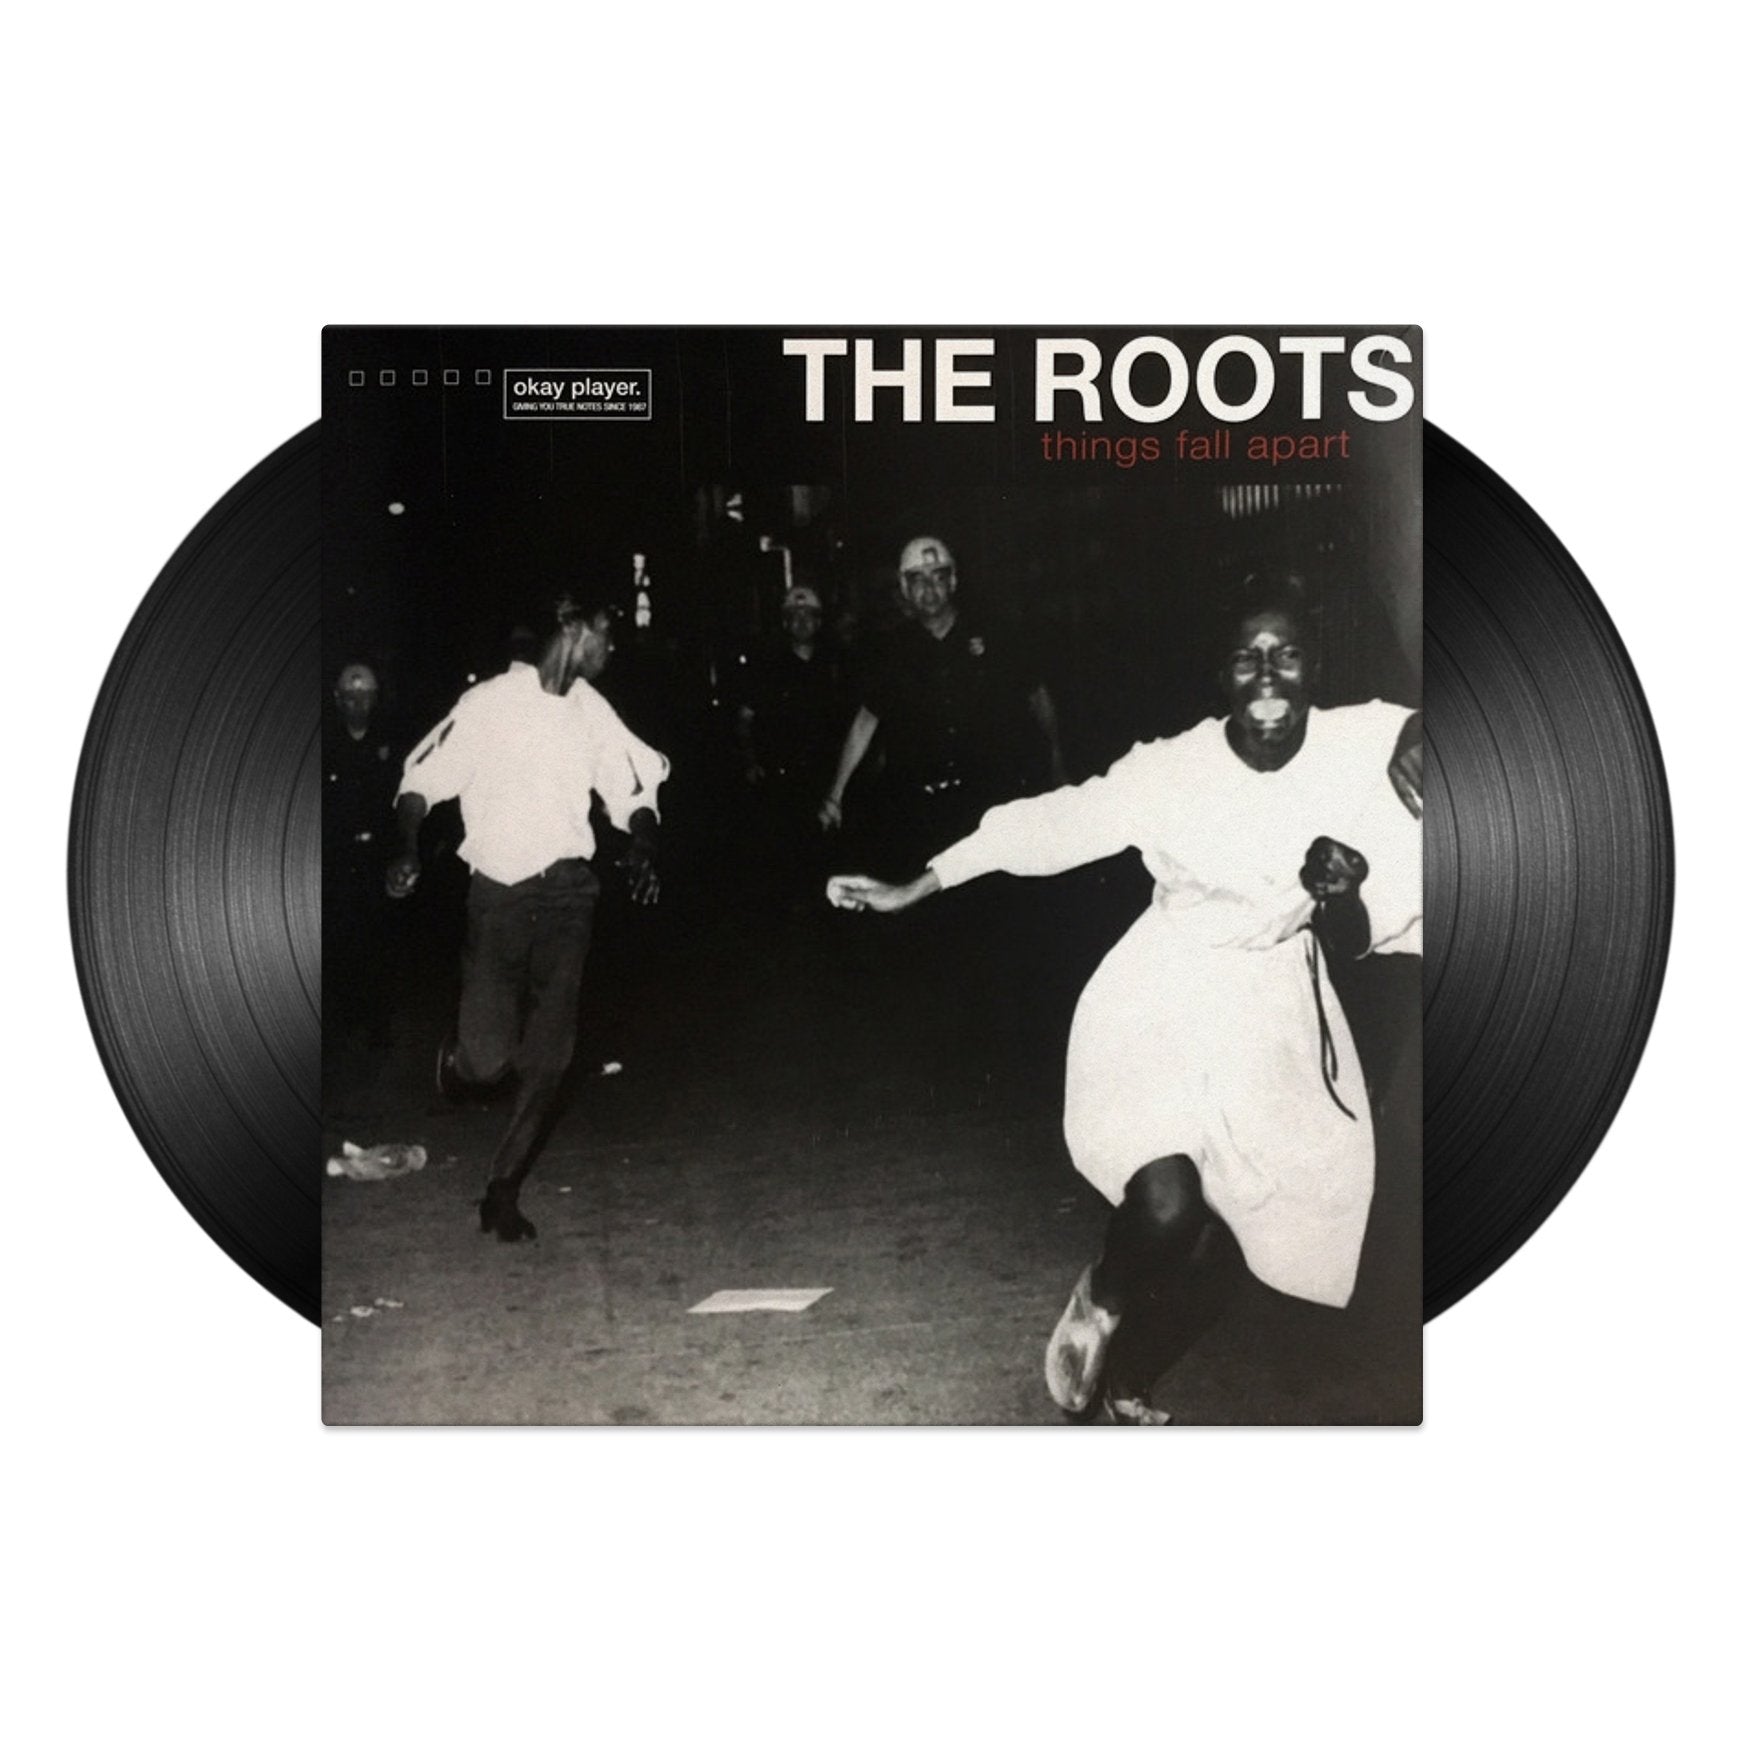 The Roots - Things Fall Apart (Vinyl LP)